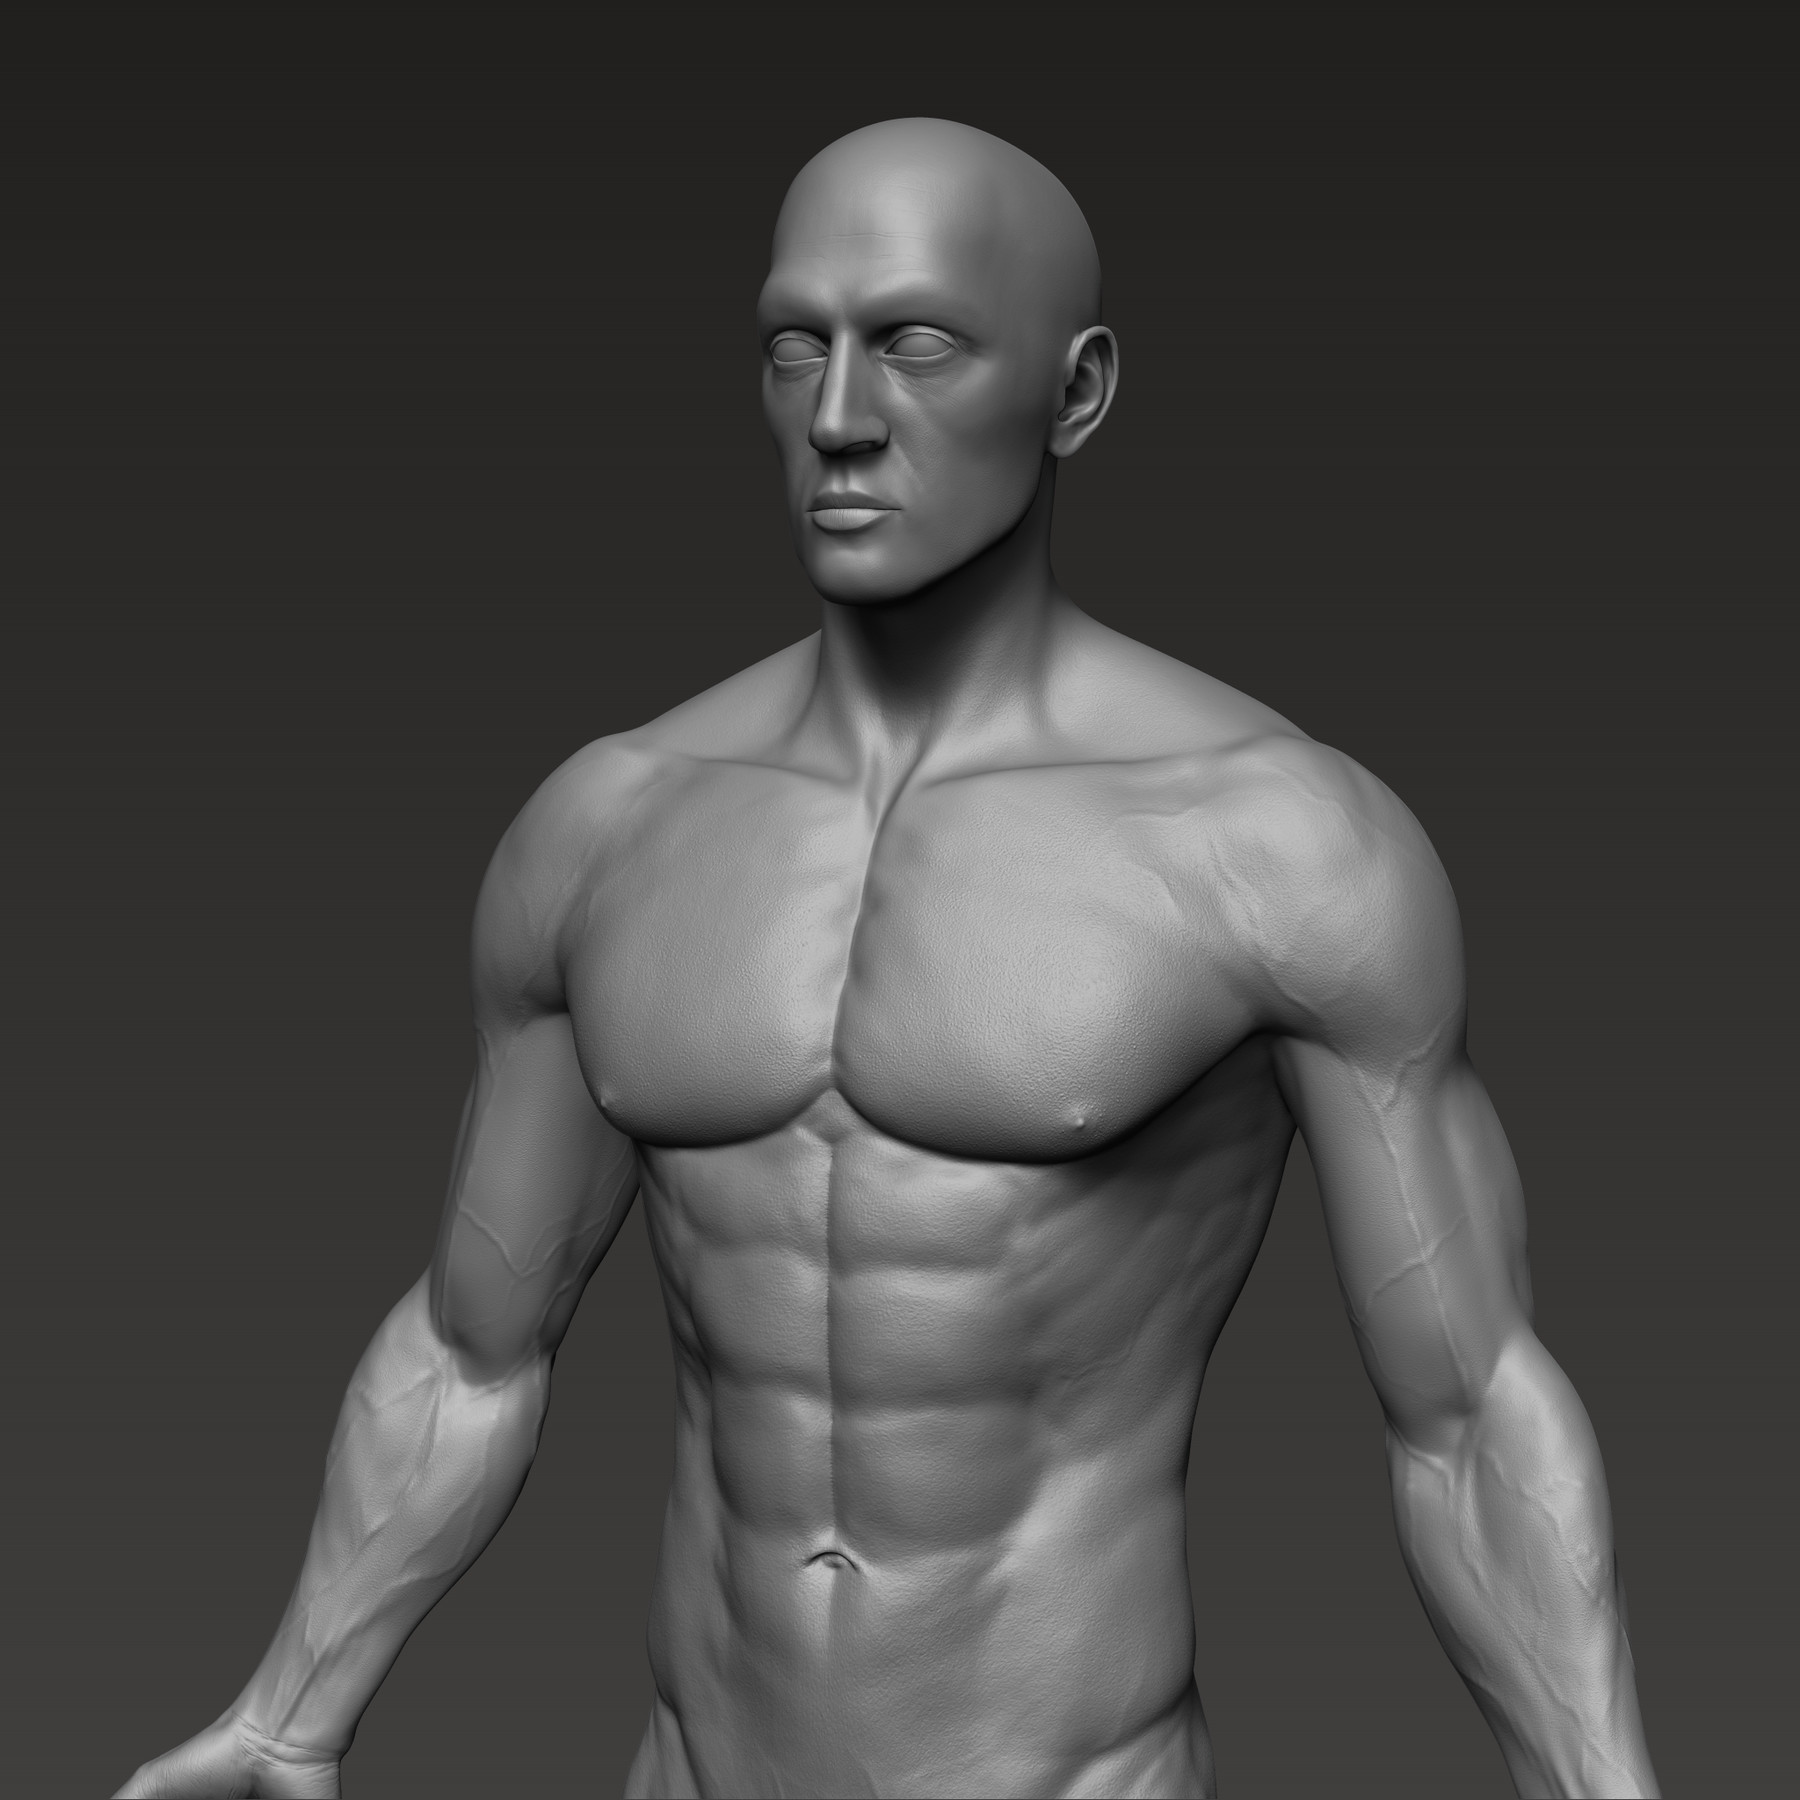 Muscles Of The Torso Model Full Body Muscle Anatomy 3d Model | Images